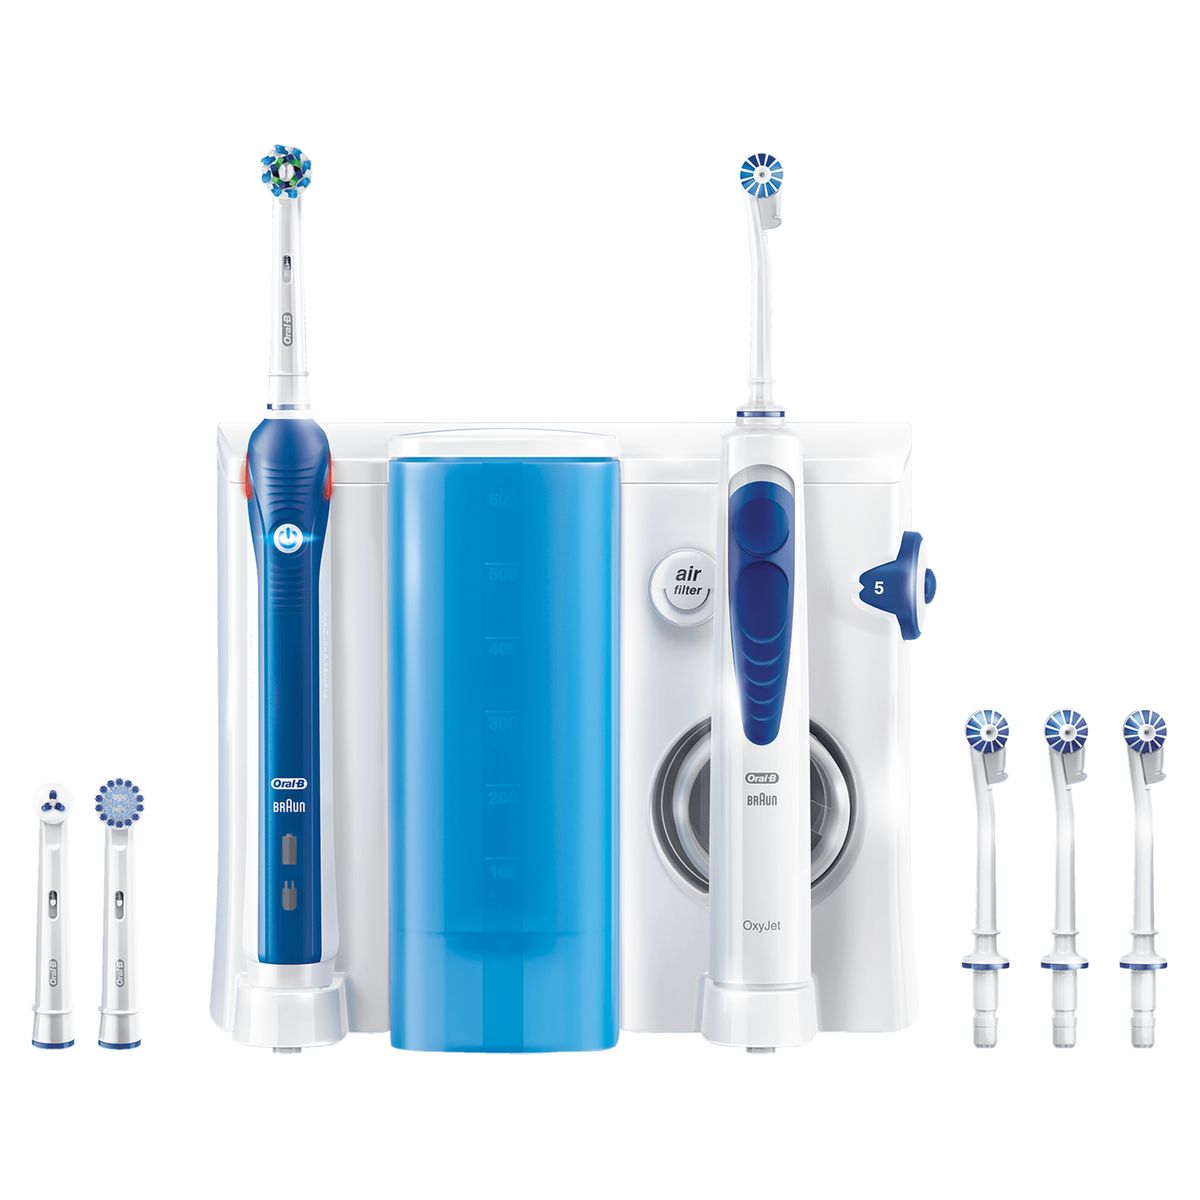 Oral-B Oral Care Center PRO 2000 Electric Toothbrush + Oxyjet Oral Irrigator for gentle cleaning on the gum line Oxyjet + Pro 2